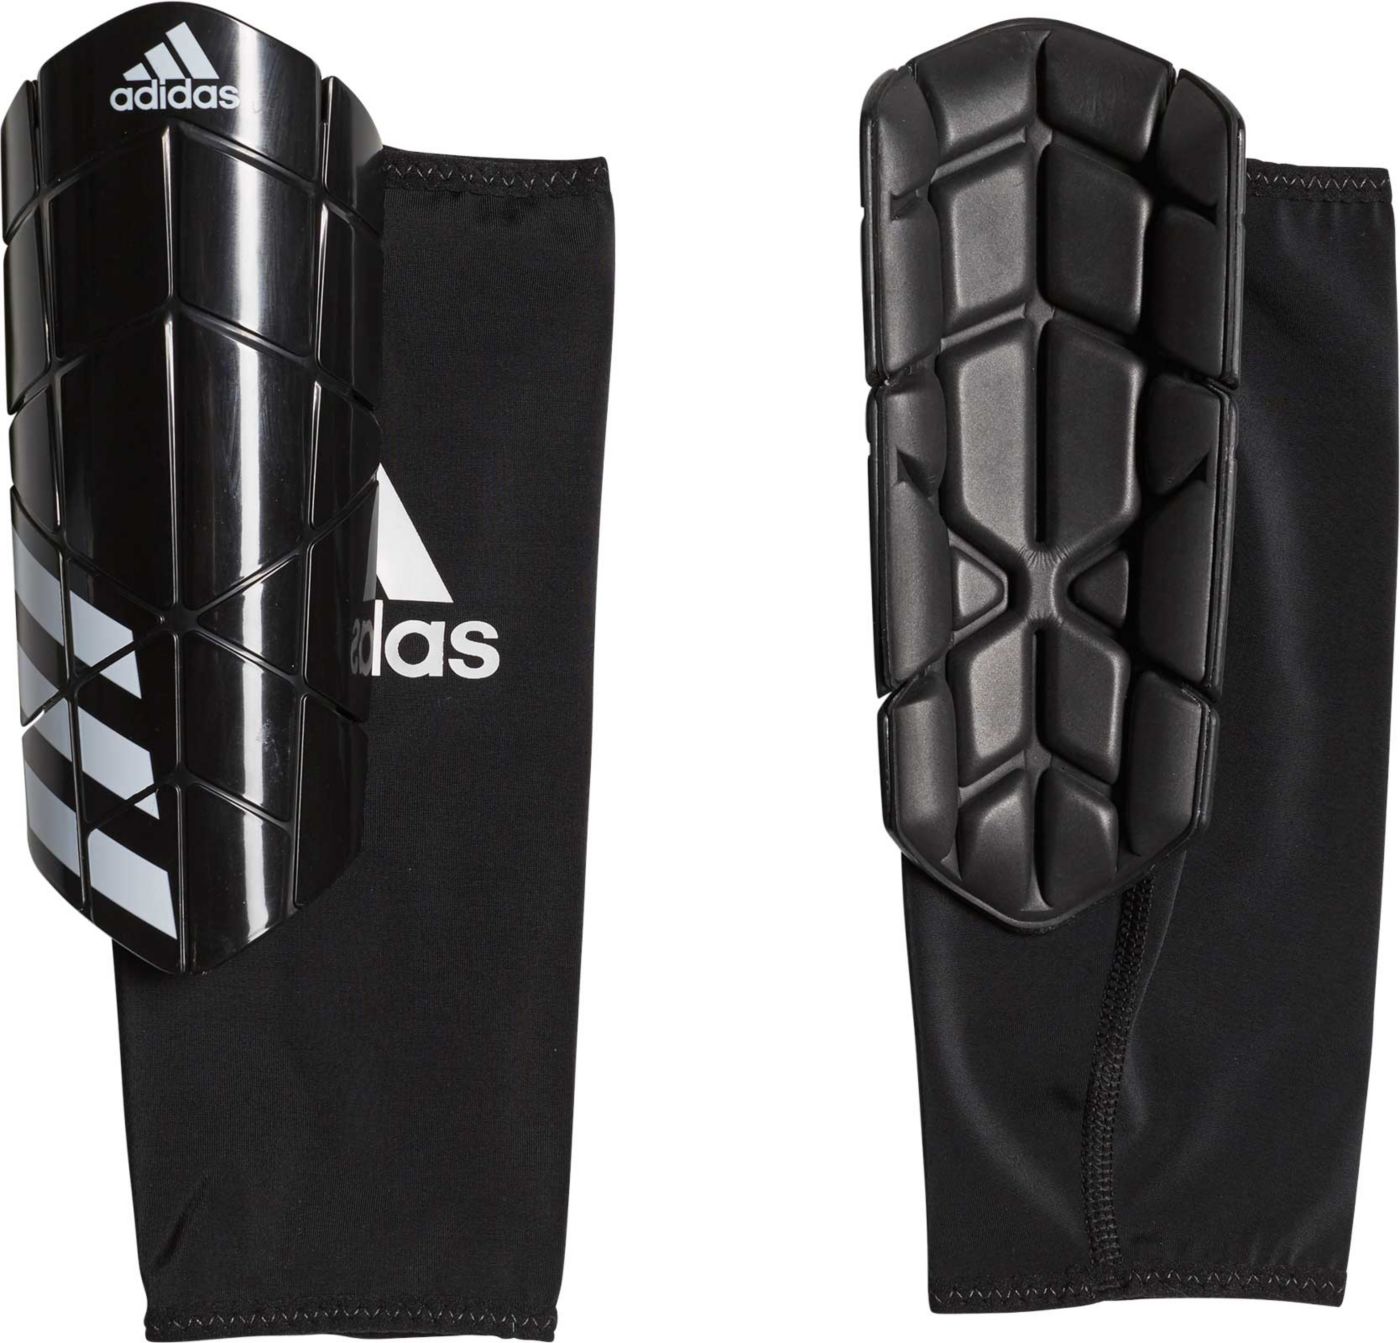 Download adidas Adult Ever Pro Soccer Shin Guards | DICK'S Sporting ...